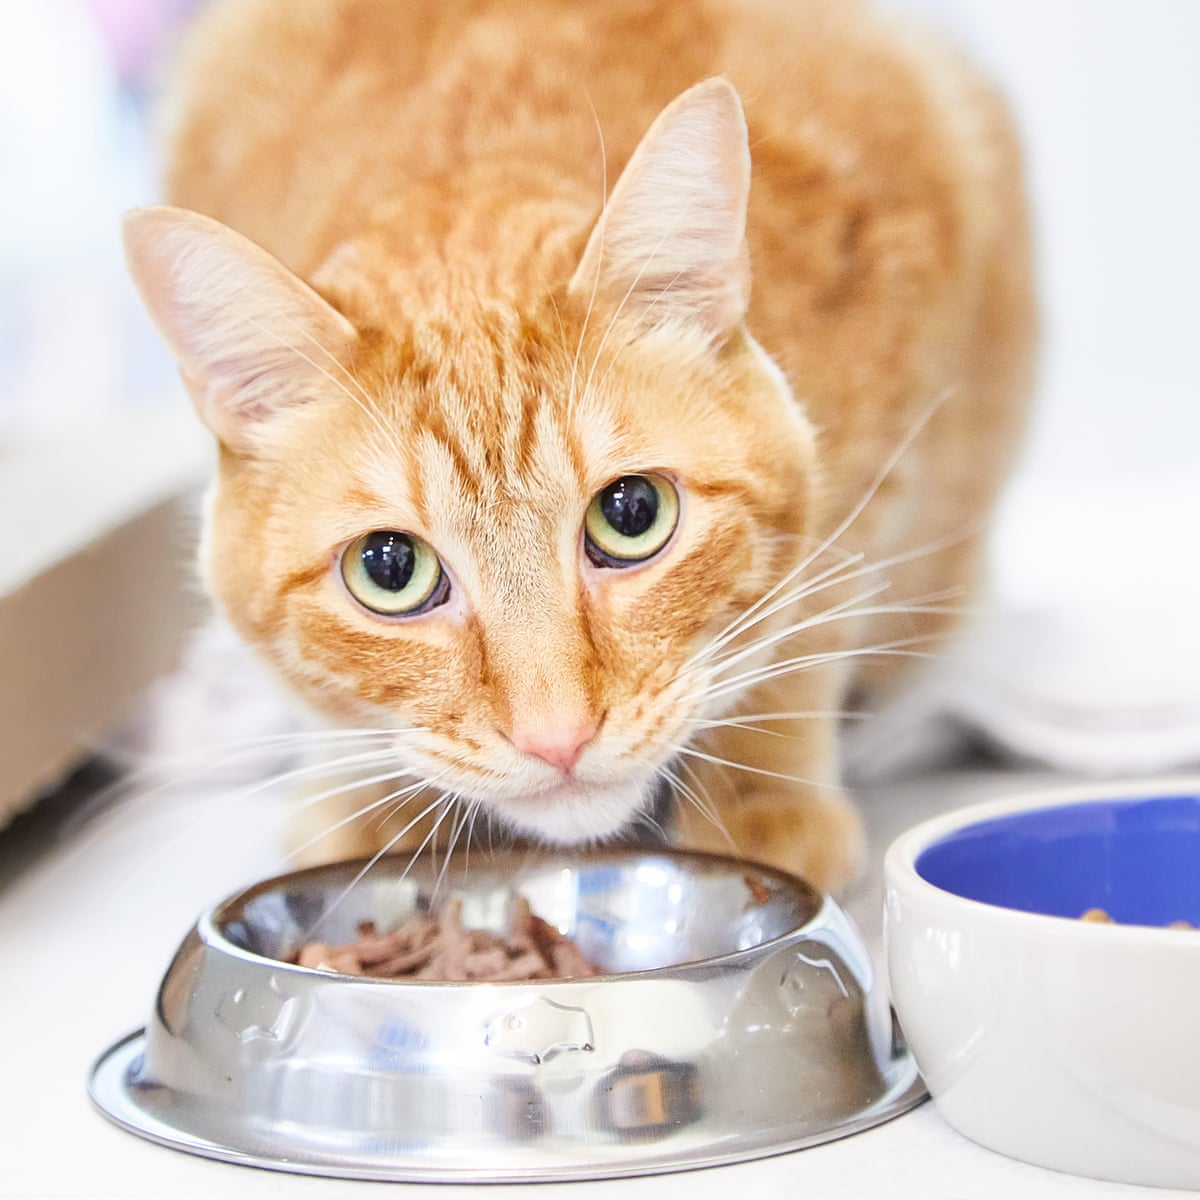 Food For Cats With Diarrhea Uk